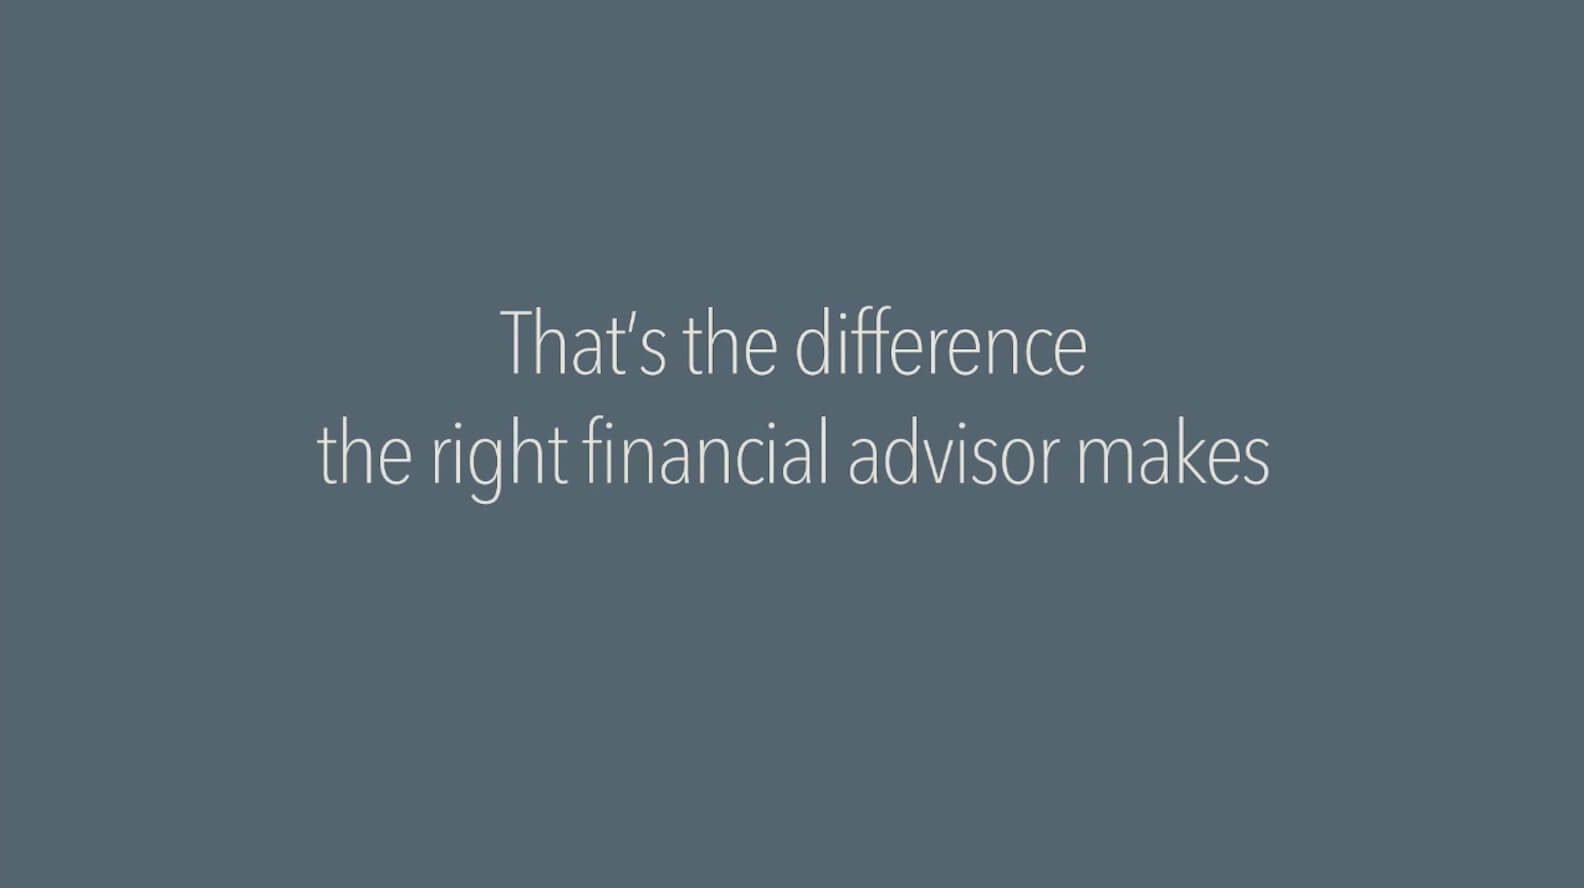 That's the difference the right financial advisor makes